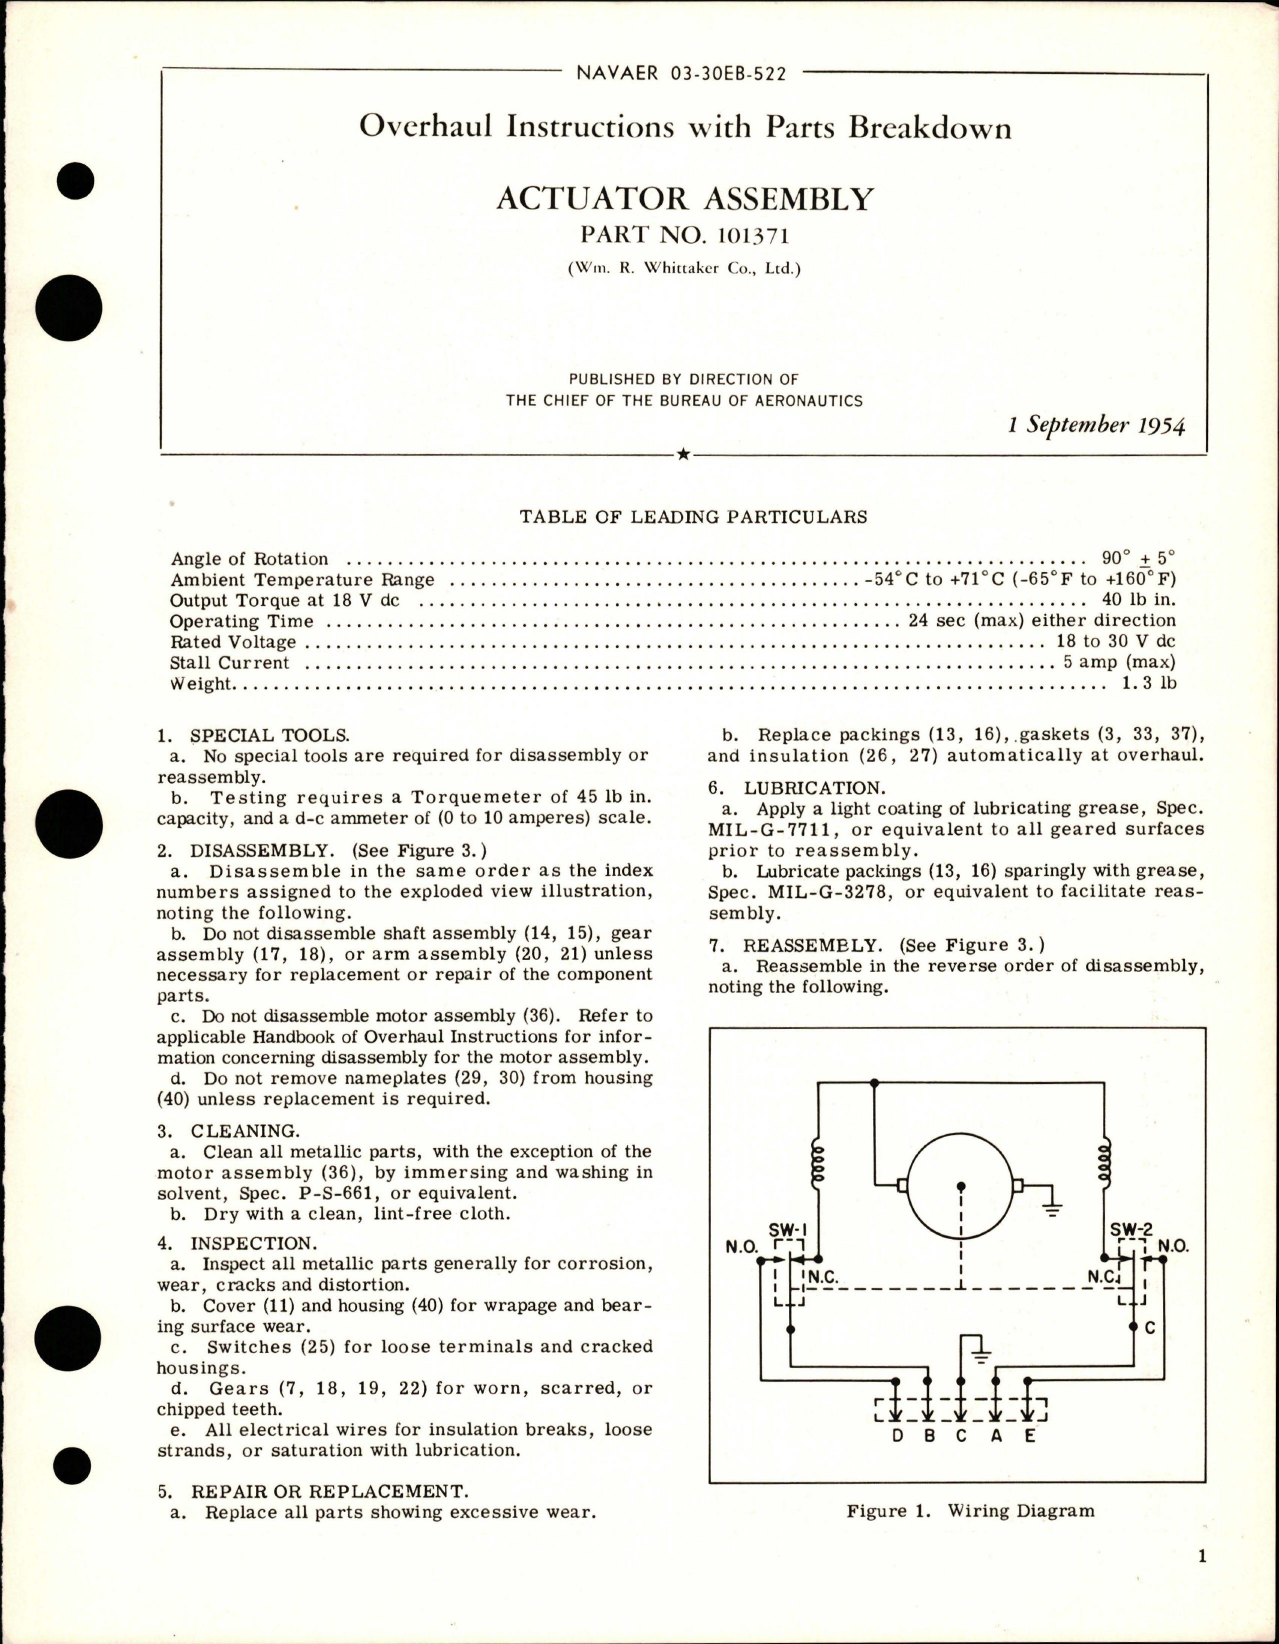 Sample page 1 from AirCorps Library document: Overhaul Instructions with Parts Breakdown for Actuator Assembly - Part 101371